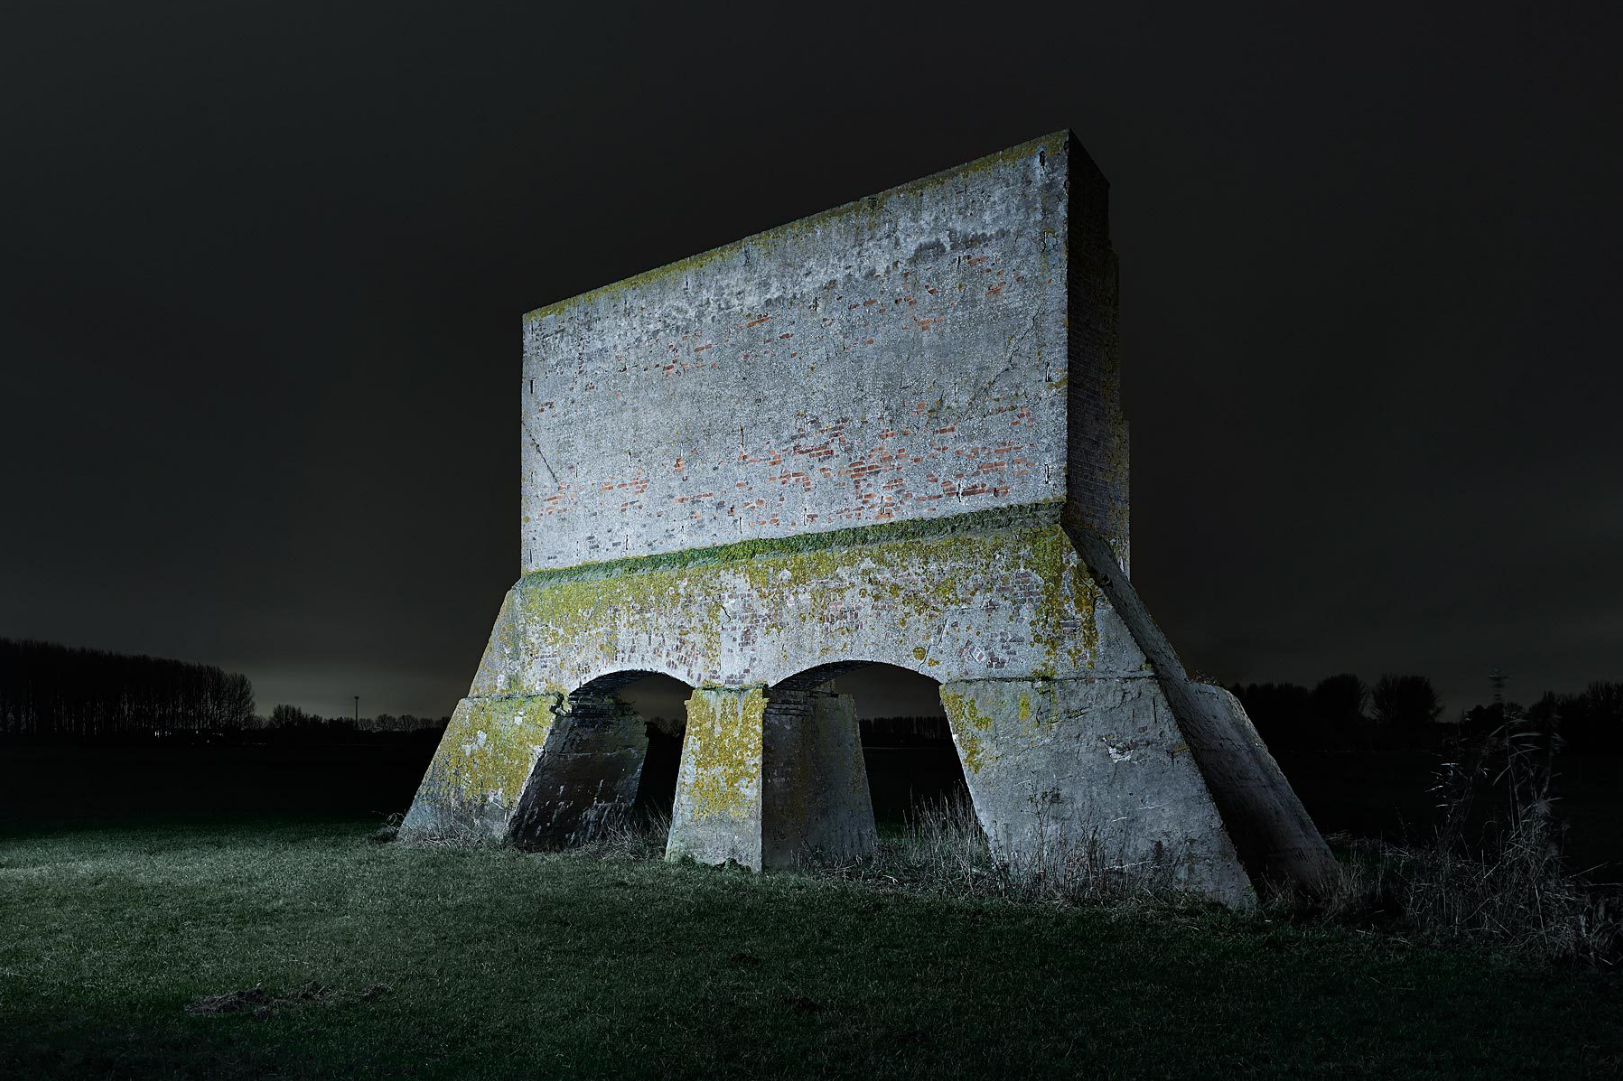 Abandoned World War II Bunkers Provide A Haunting Look Into The Past